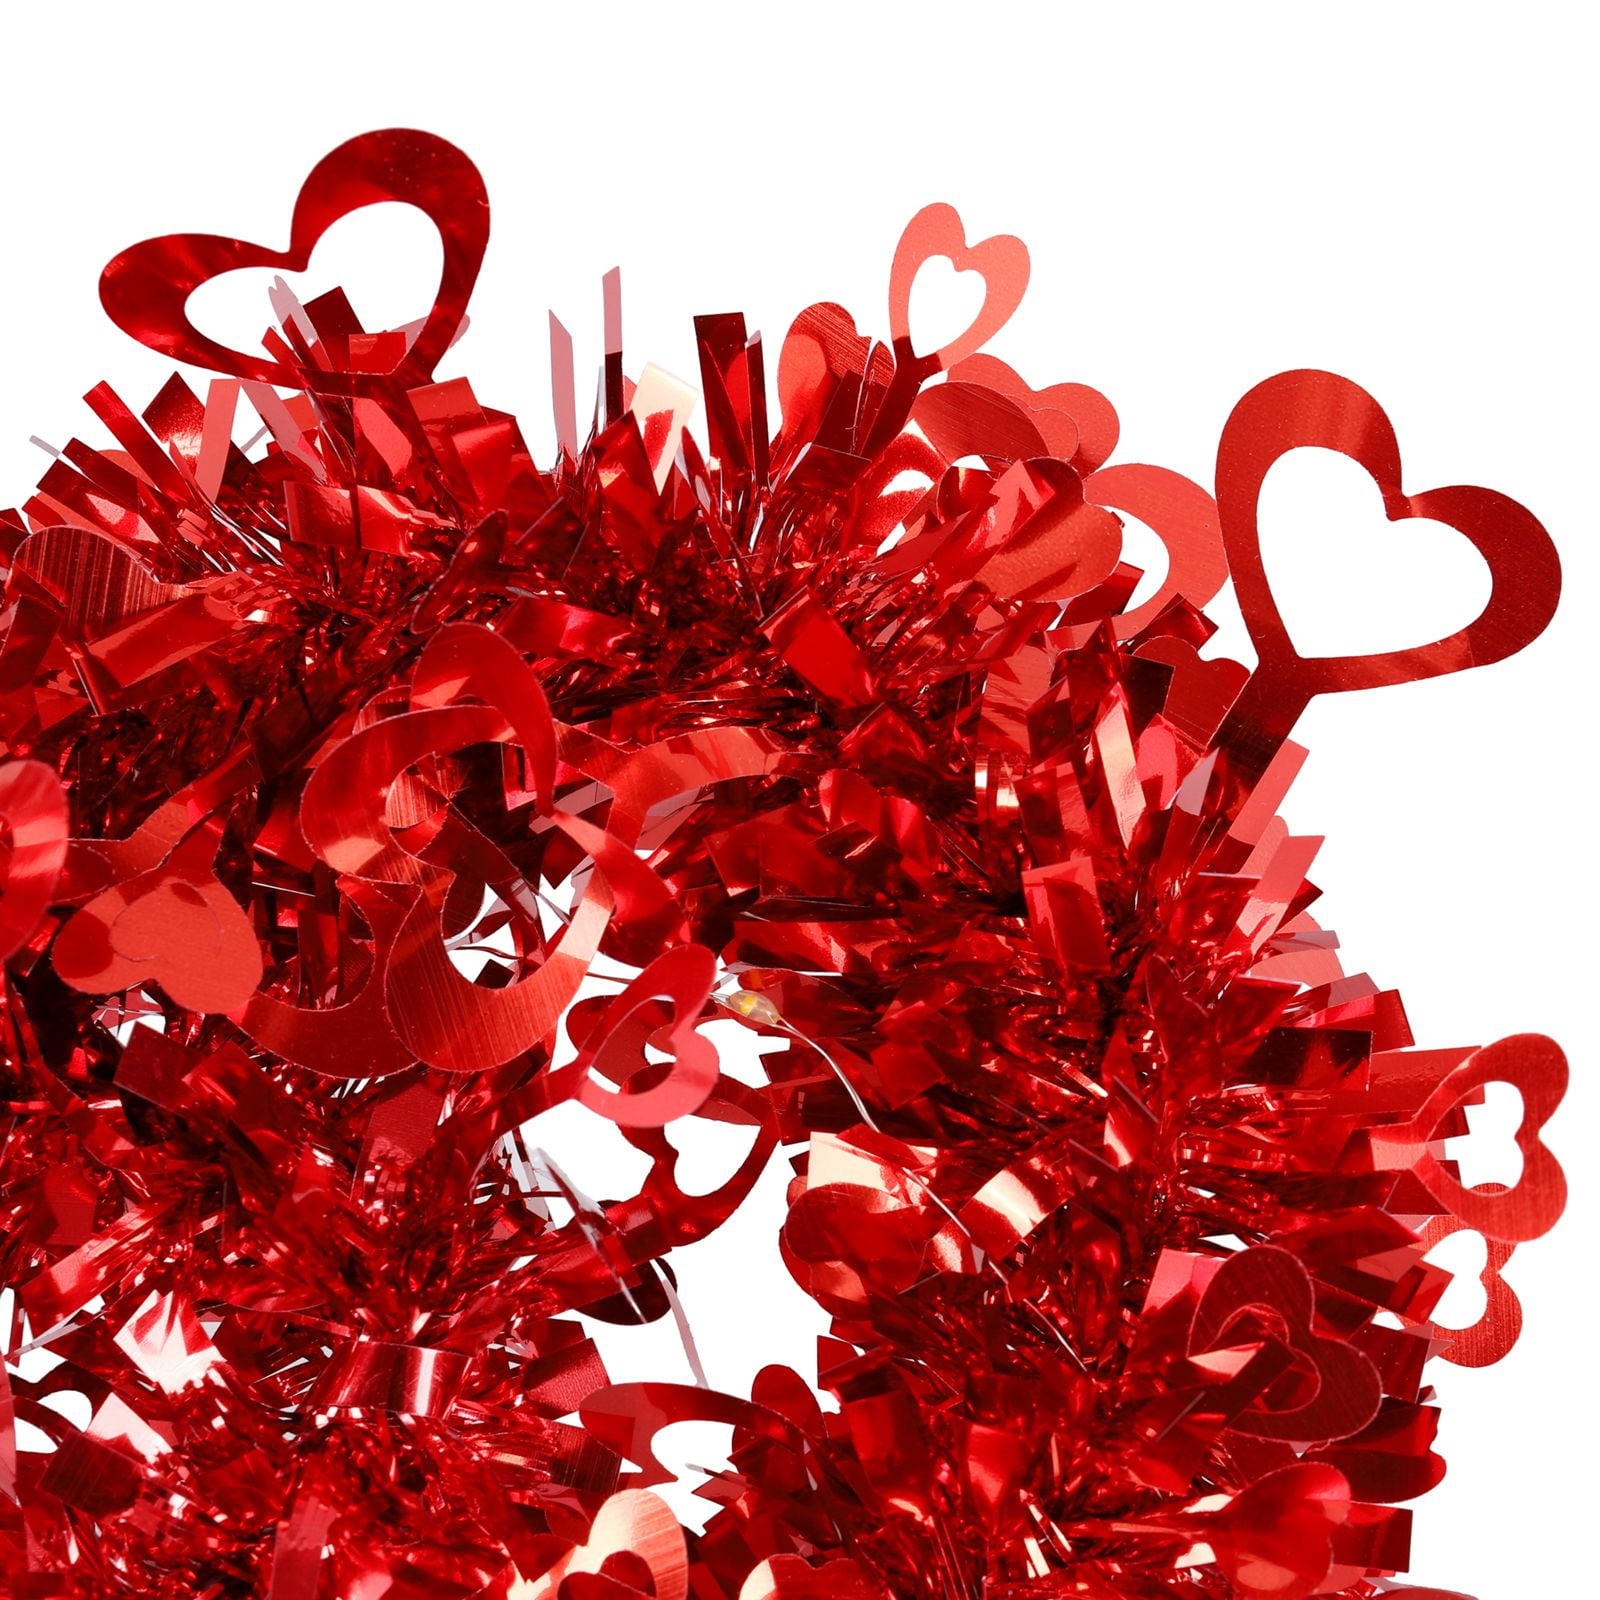 Wreath Heart Trendy Home Decor Red Garland Fringe Trim Christmas Tinsel  Garland Couples Ornament Love Heart Wreath Valentine's Day Decoration  Hanging